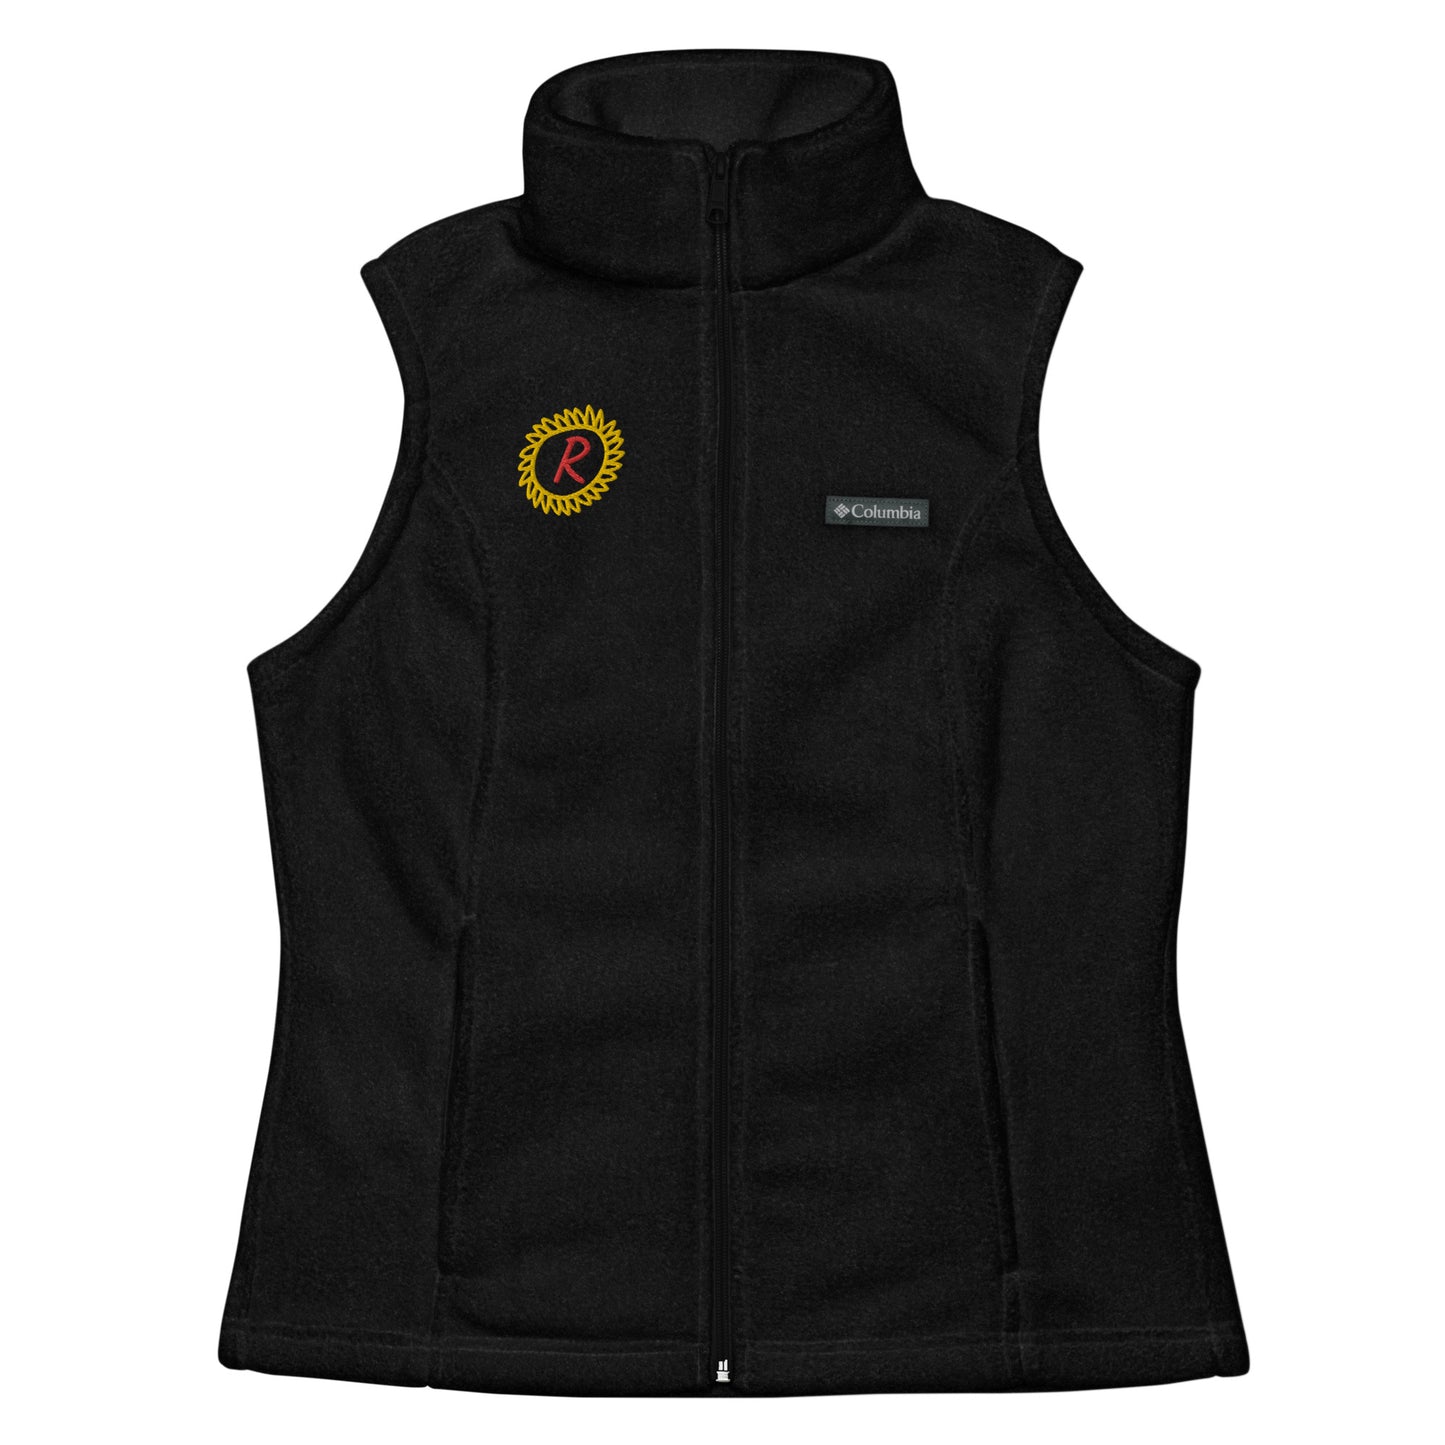 Women’s Columbia fleece vest, gold/red thread embroidery "R" in a custom circle